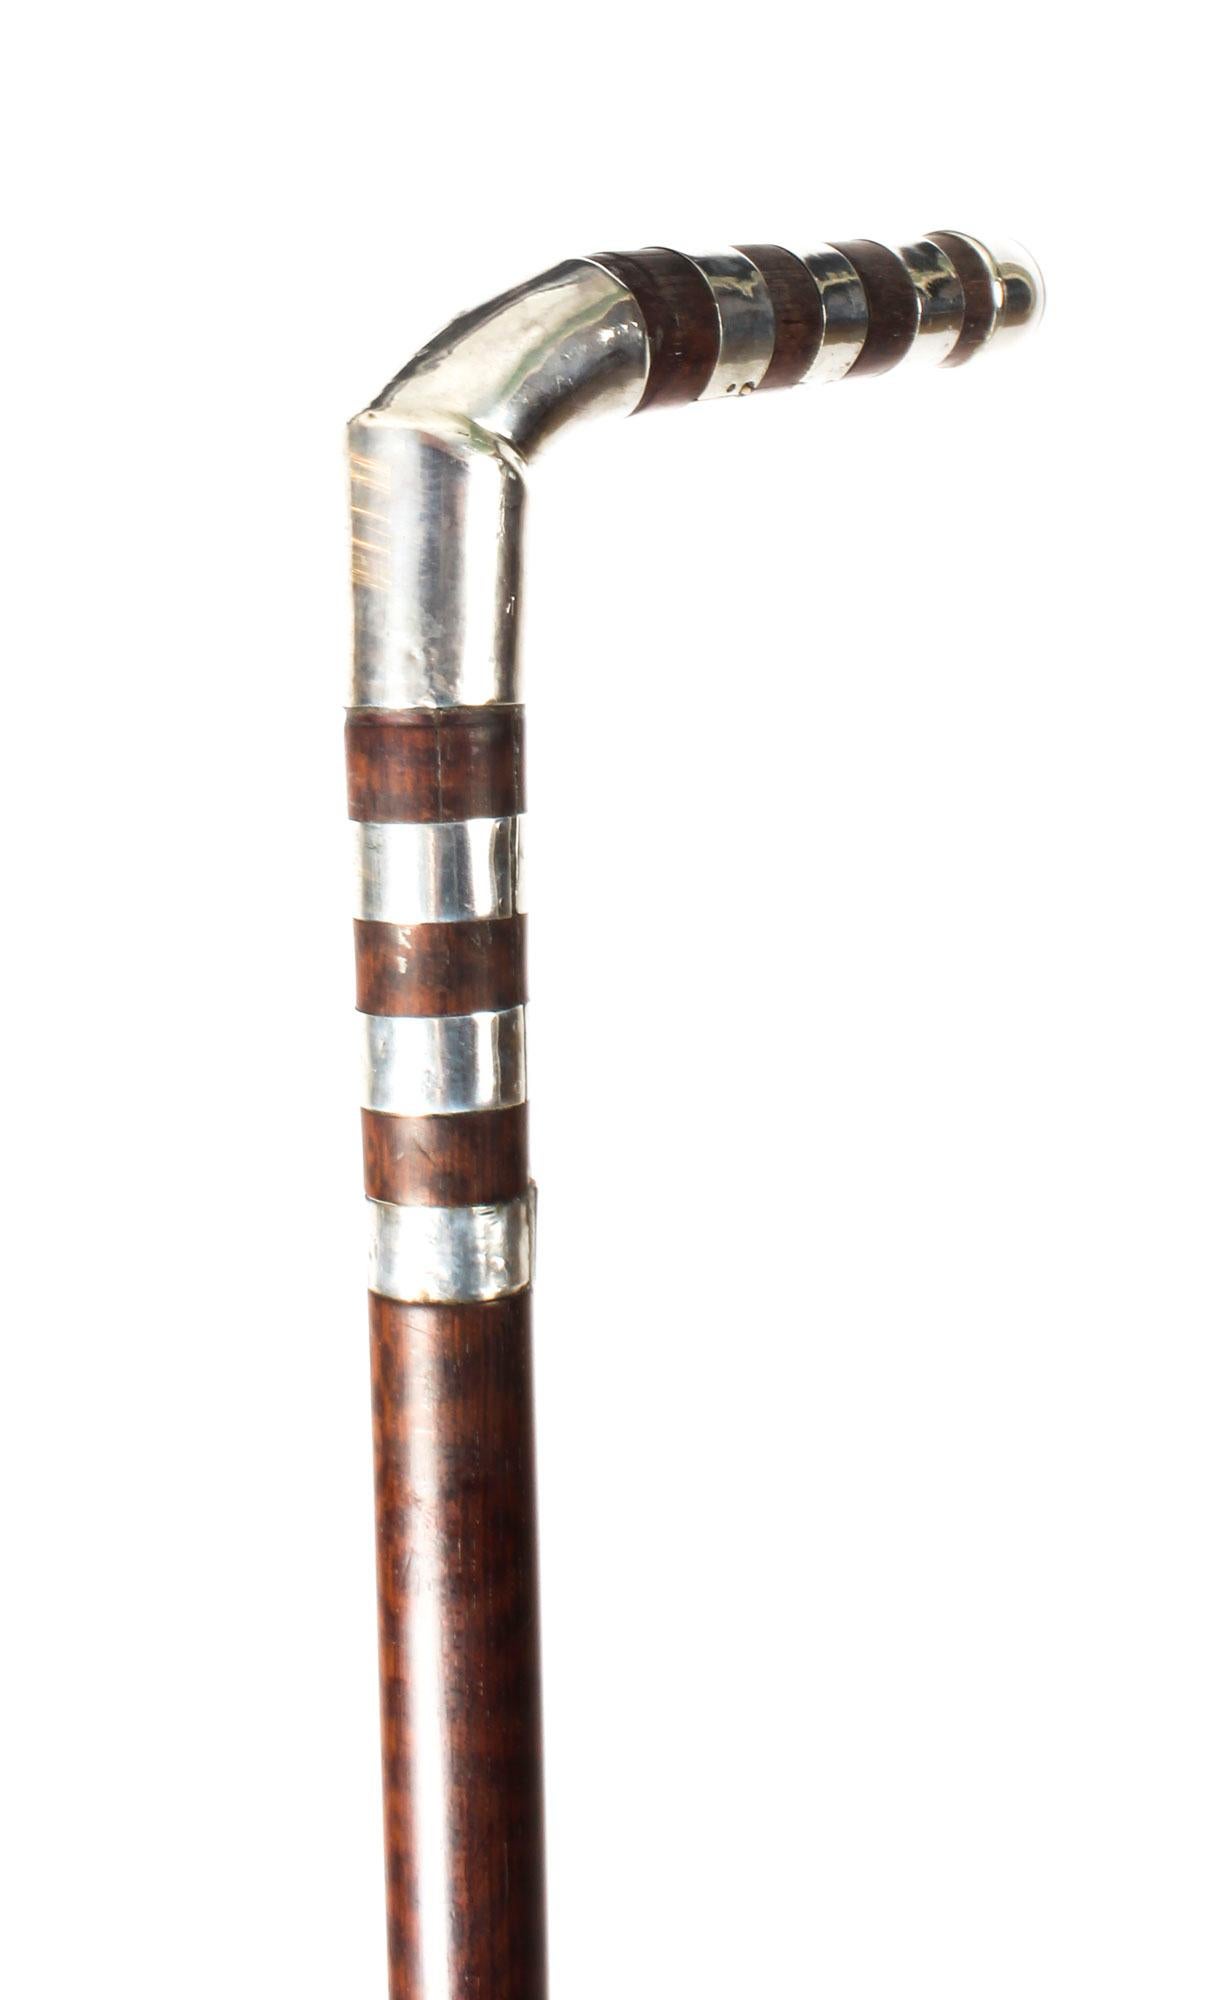 Late 19th Century Antique American Walking Cane Stick Sterling Silver Handle, 19th Century